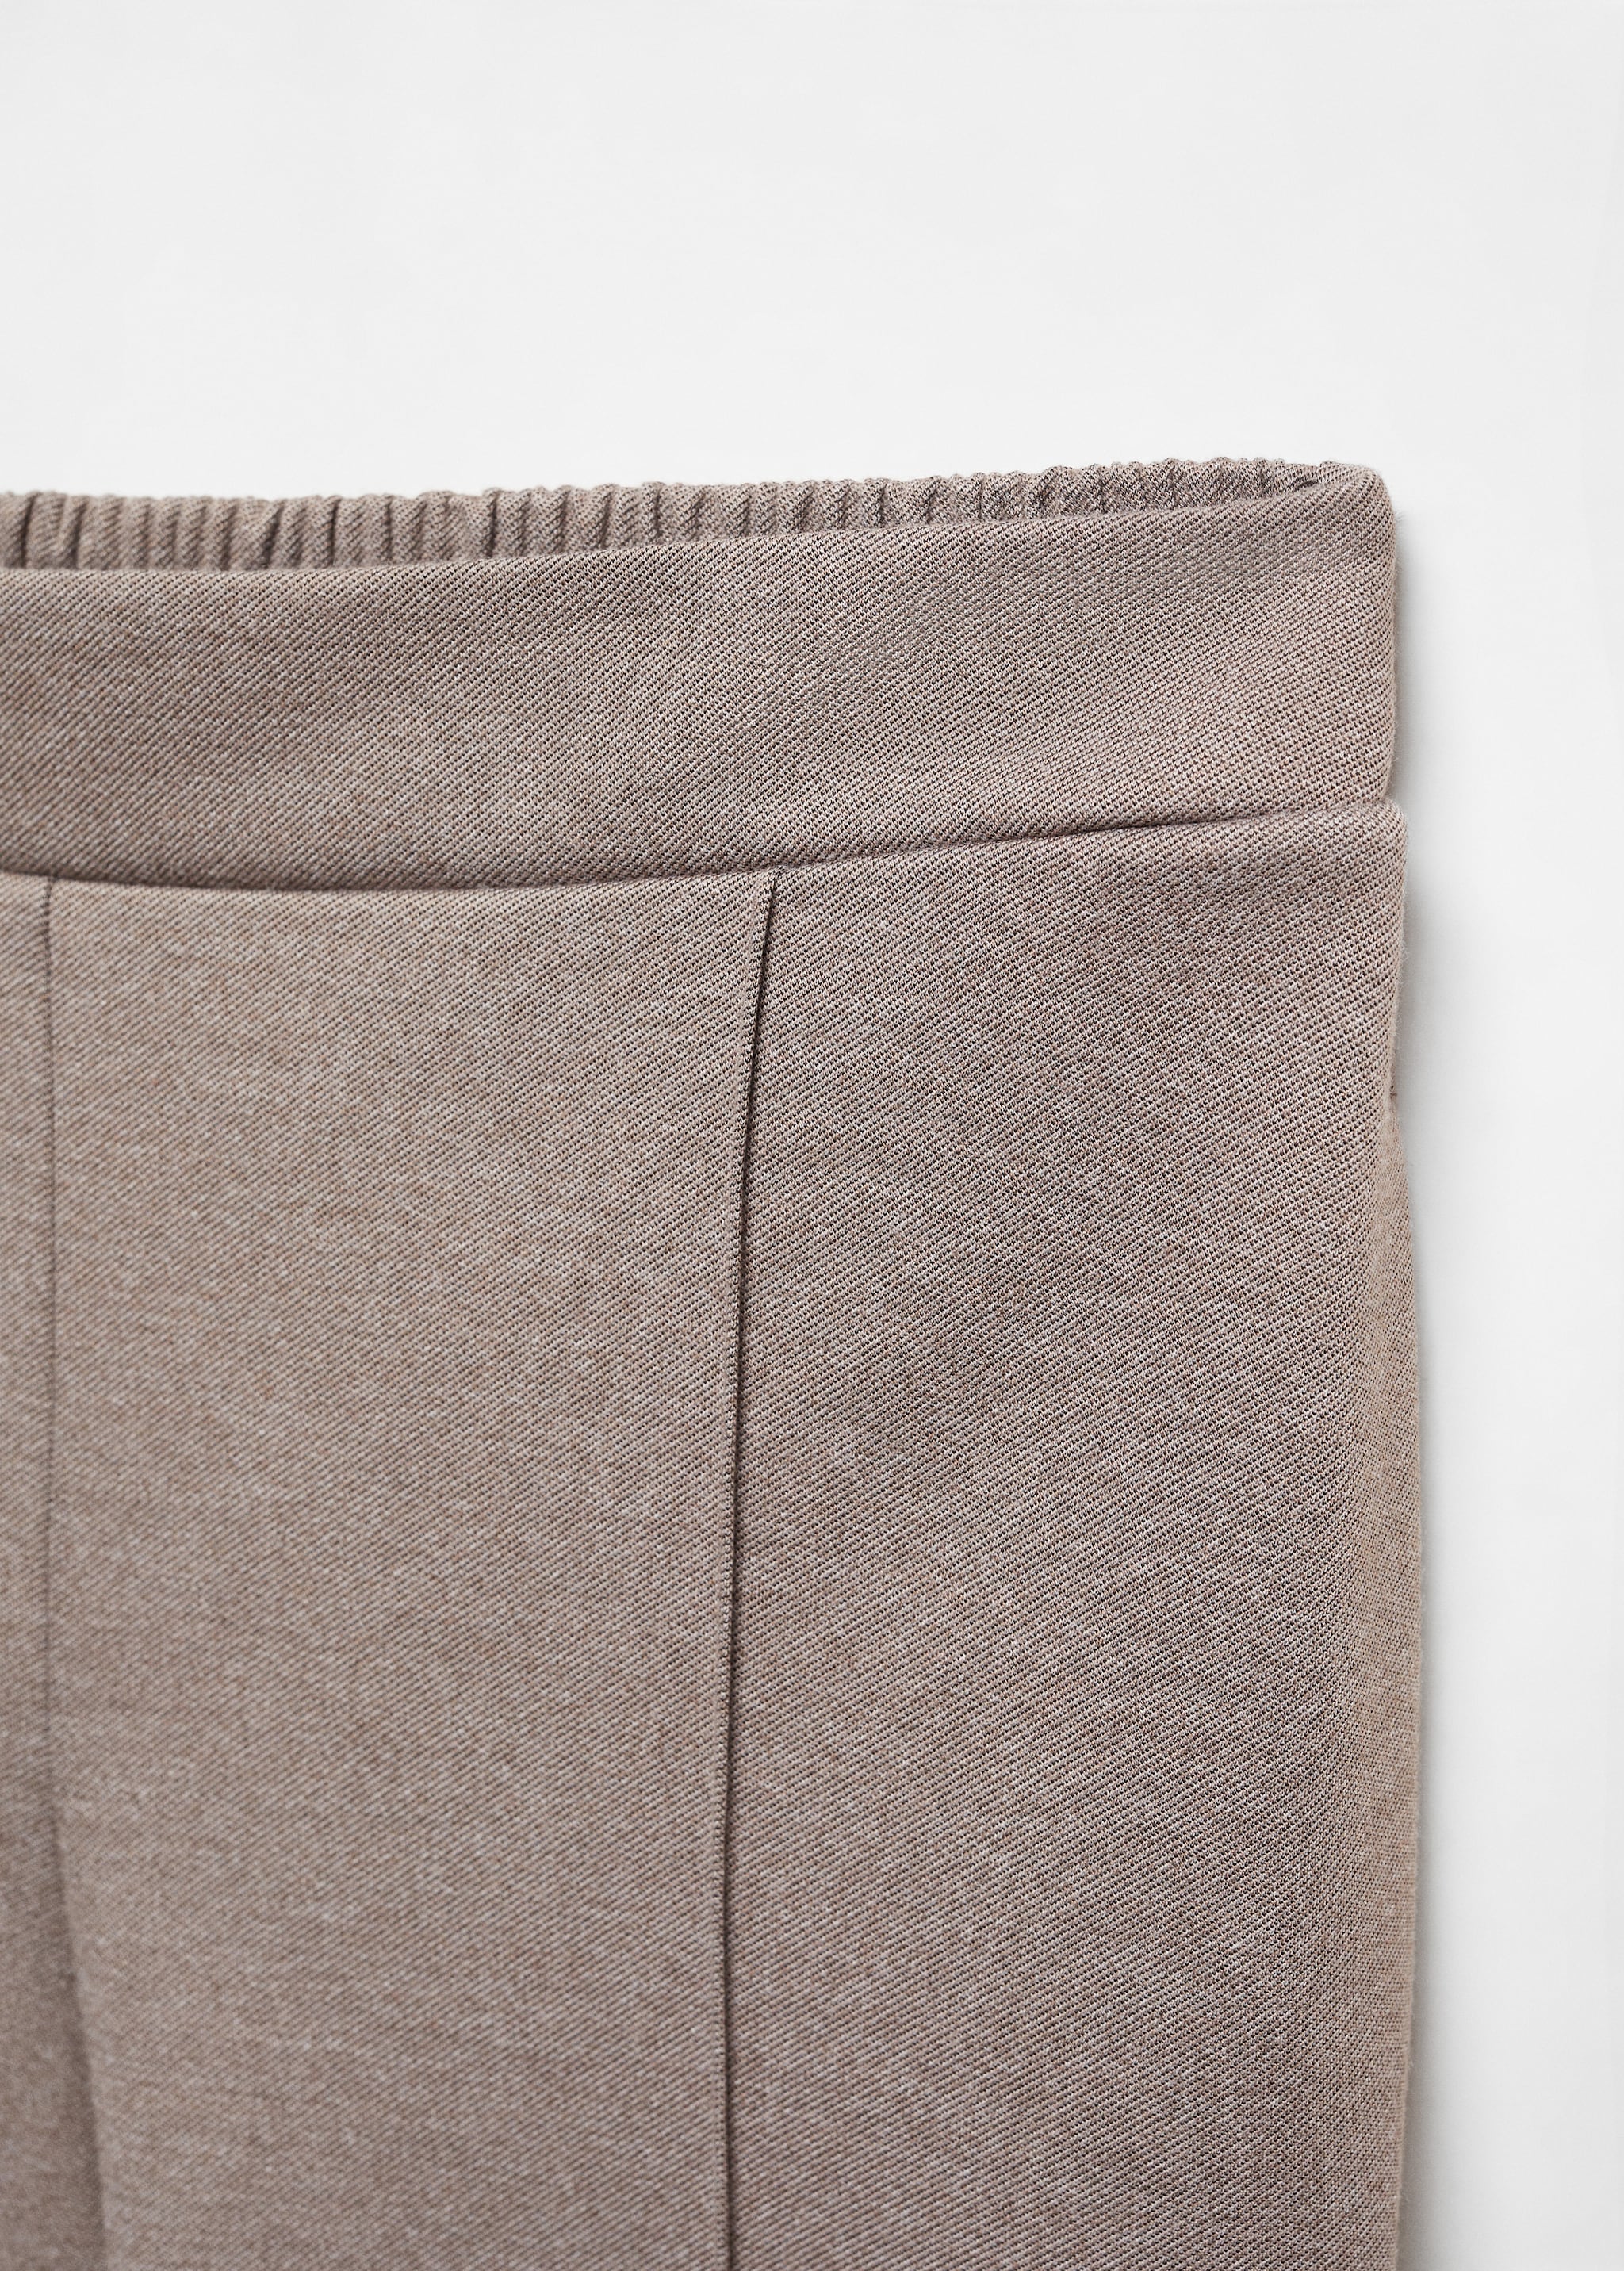 Decorative seams trousers - Details of the article 8